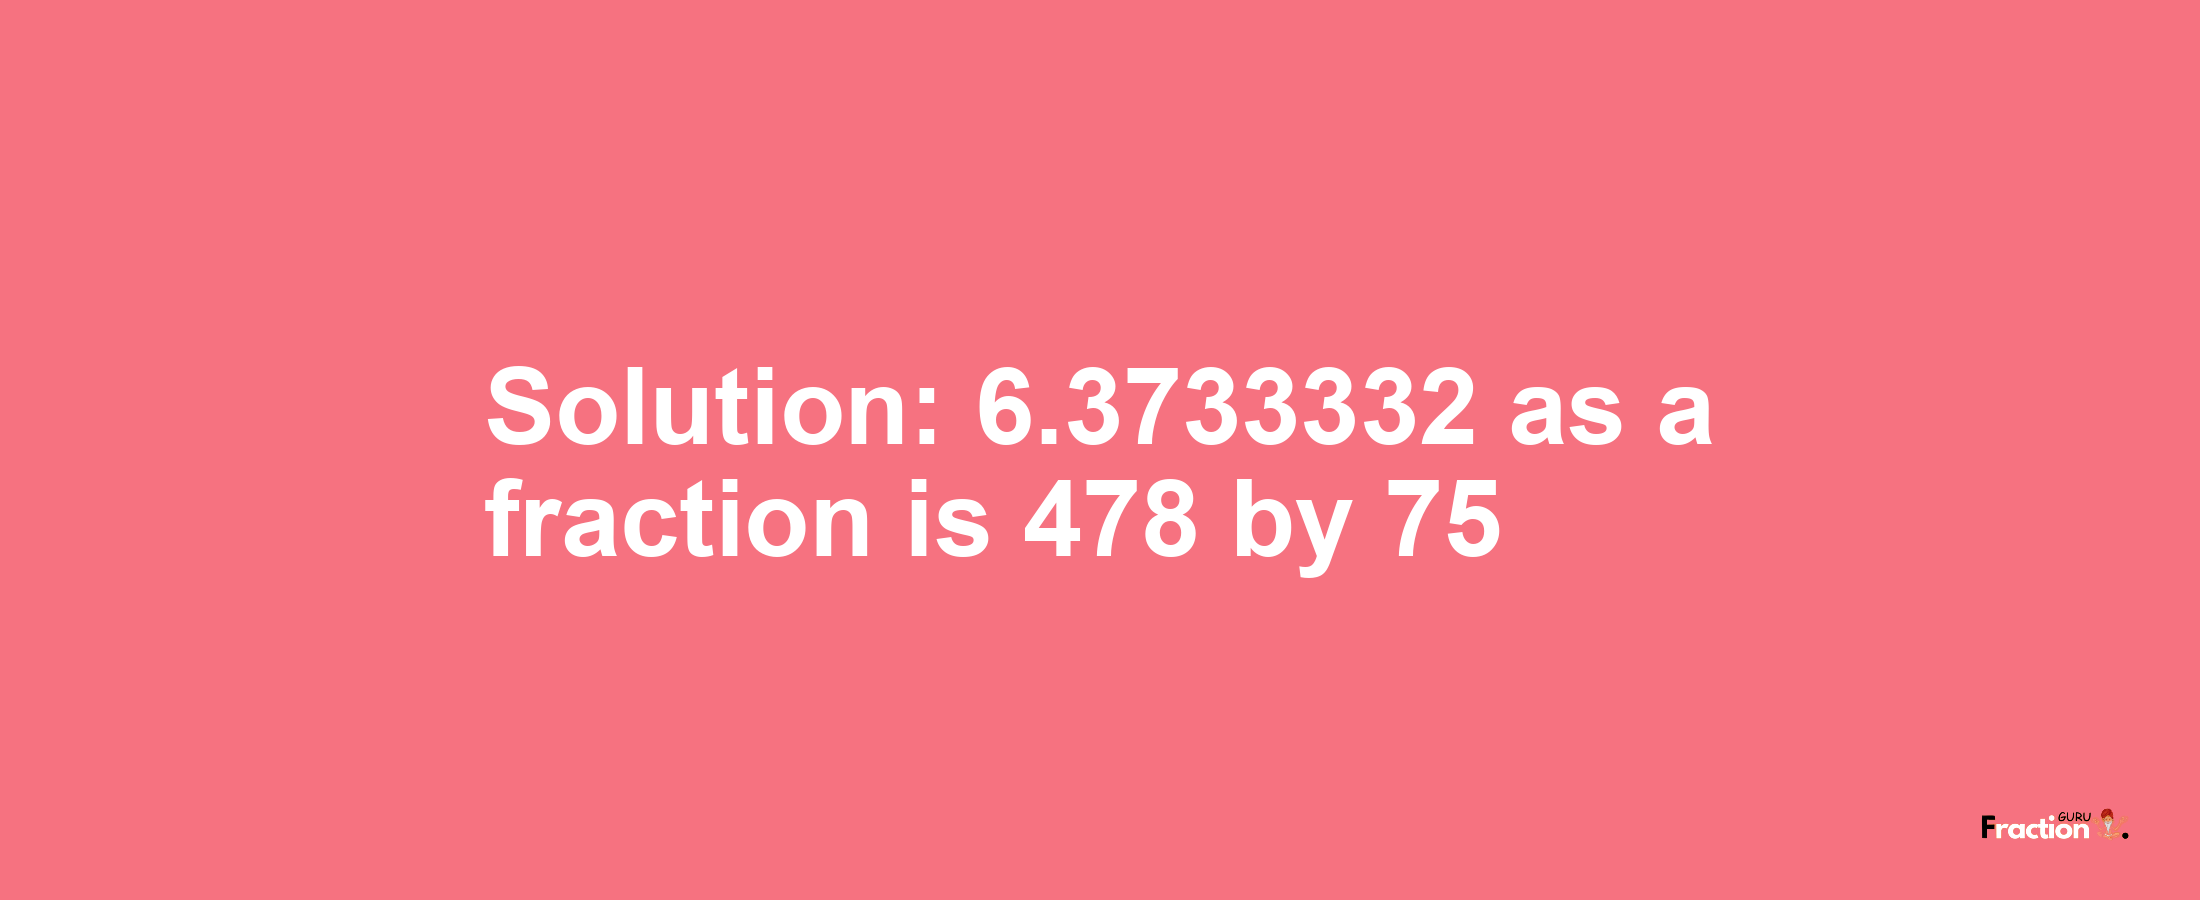 Solution:6.3733332 as a fraction is 478/75